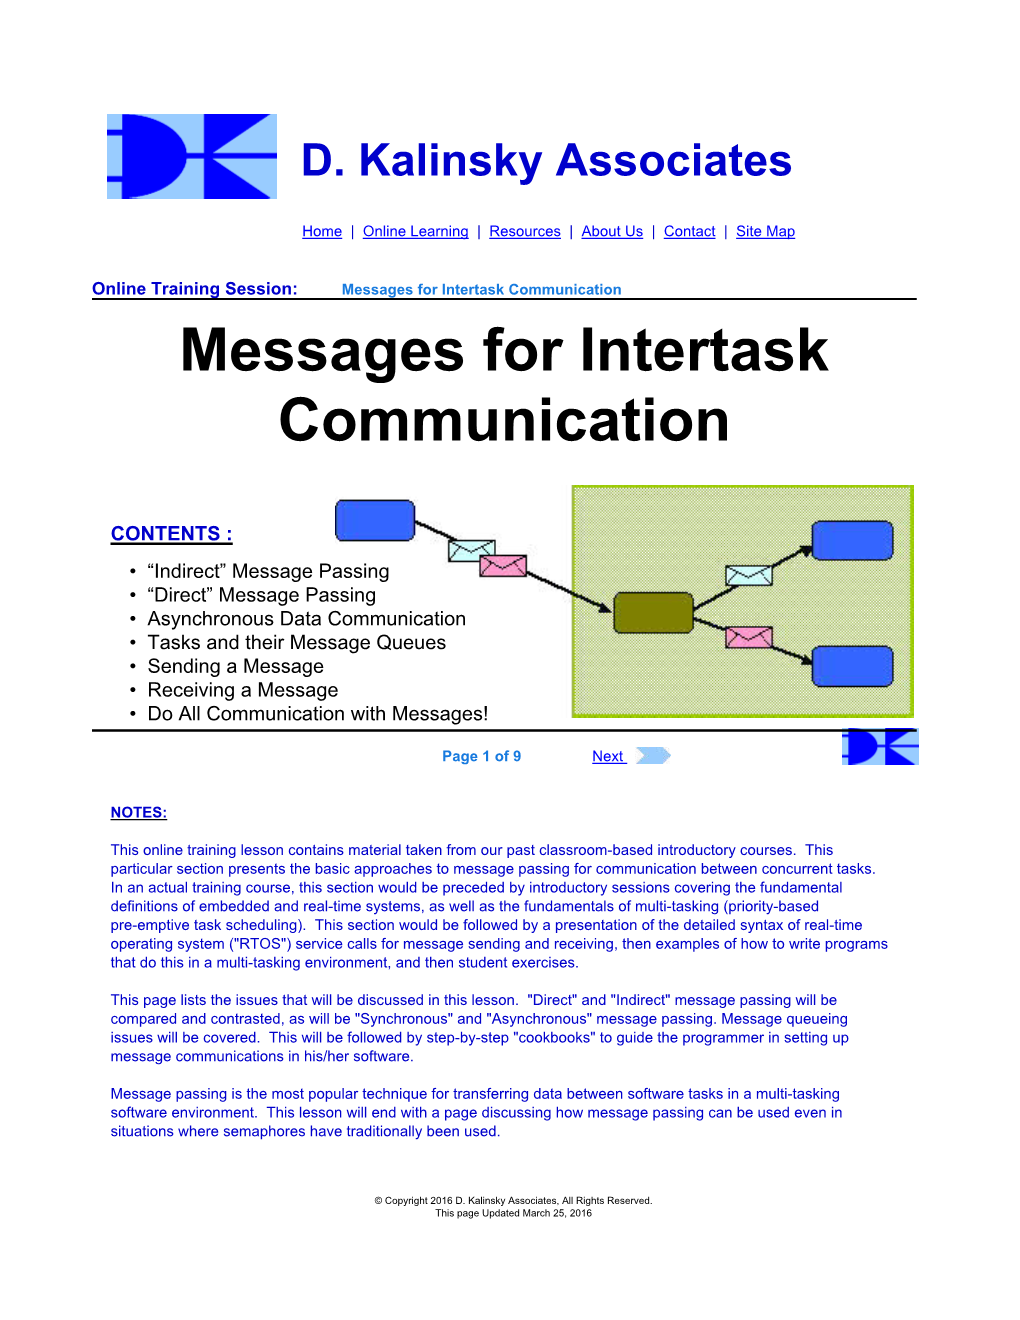 Message Passing for Intertask Communication